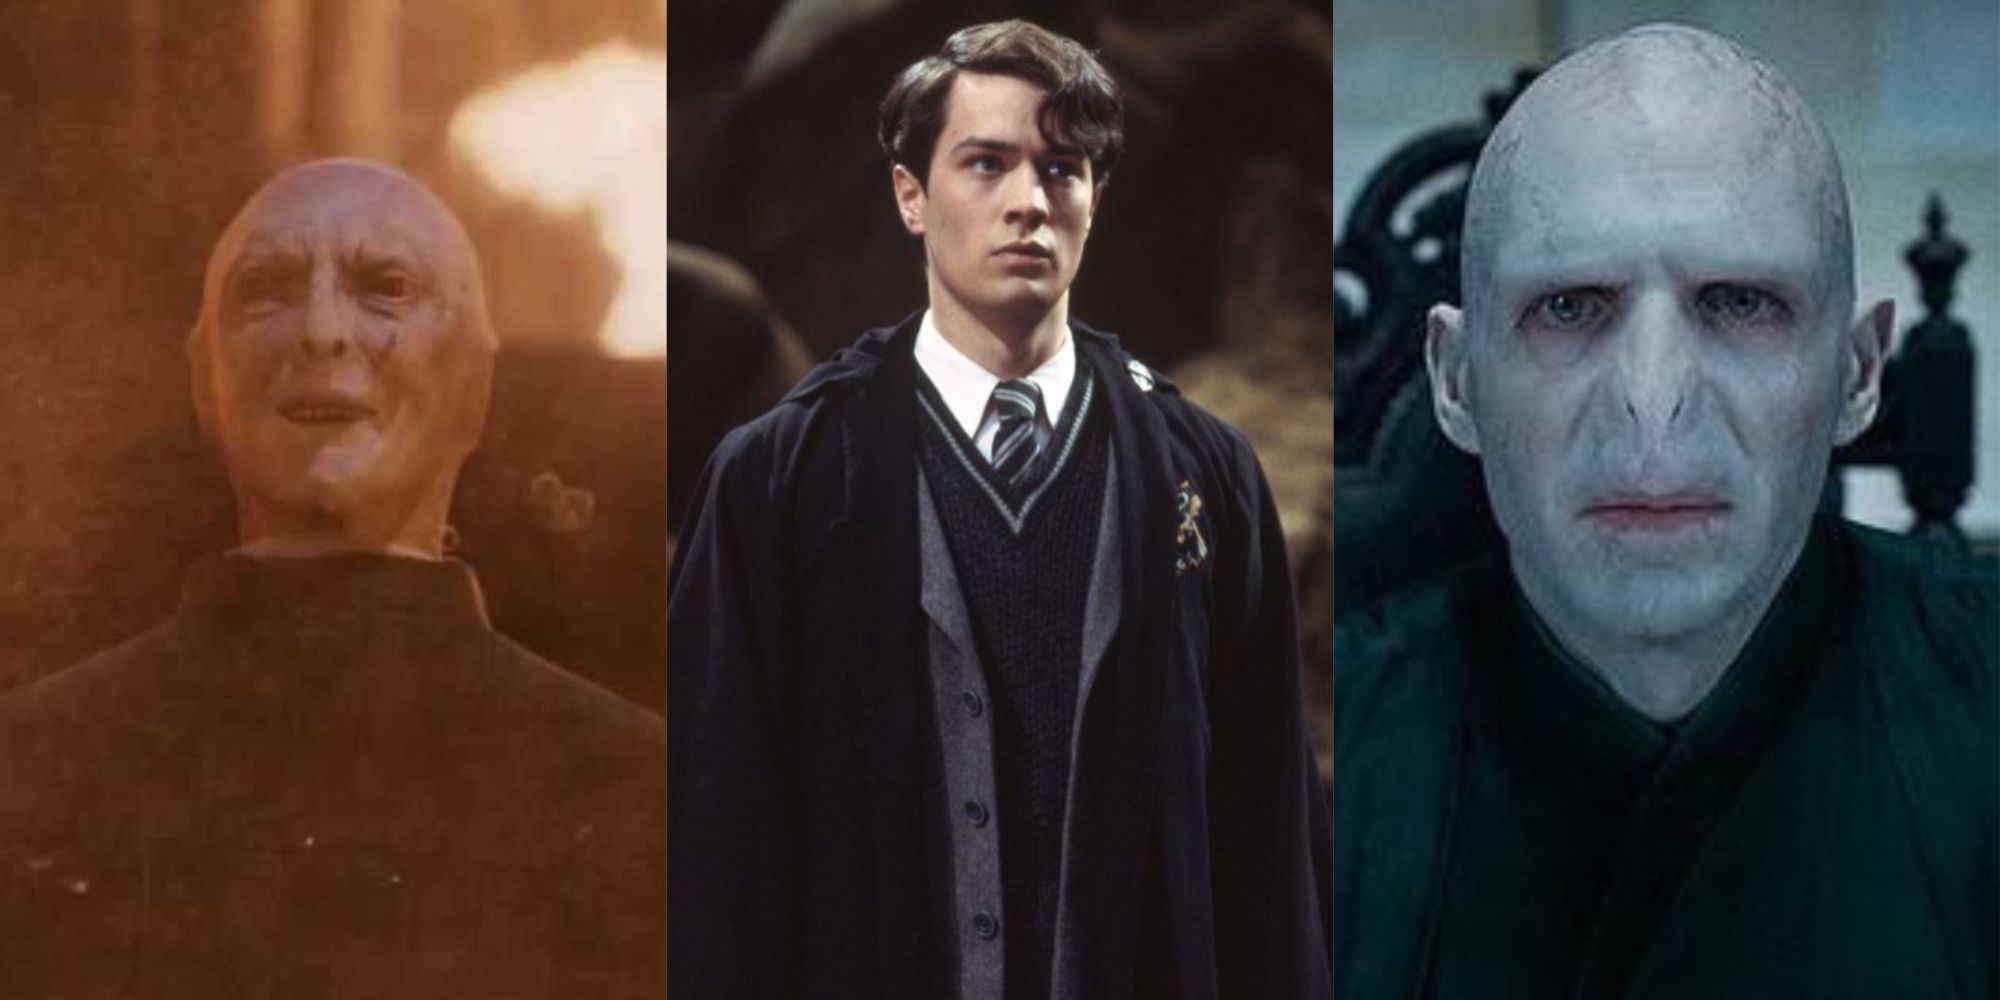 Split image of Voldemort on the back of Quirrell's head, a young Tom Riddle standing in uniform, and Voldemort sitting in a chair